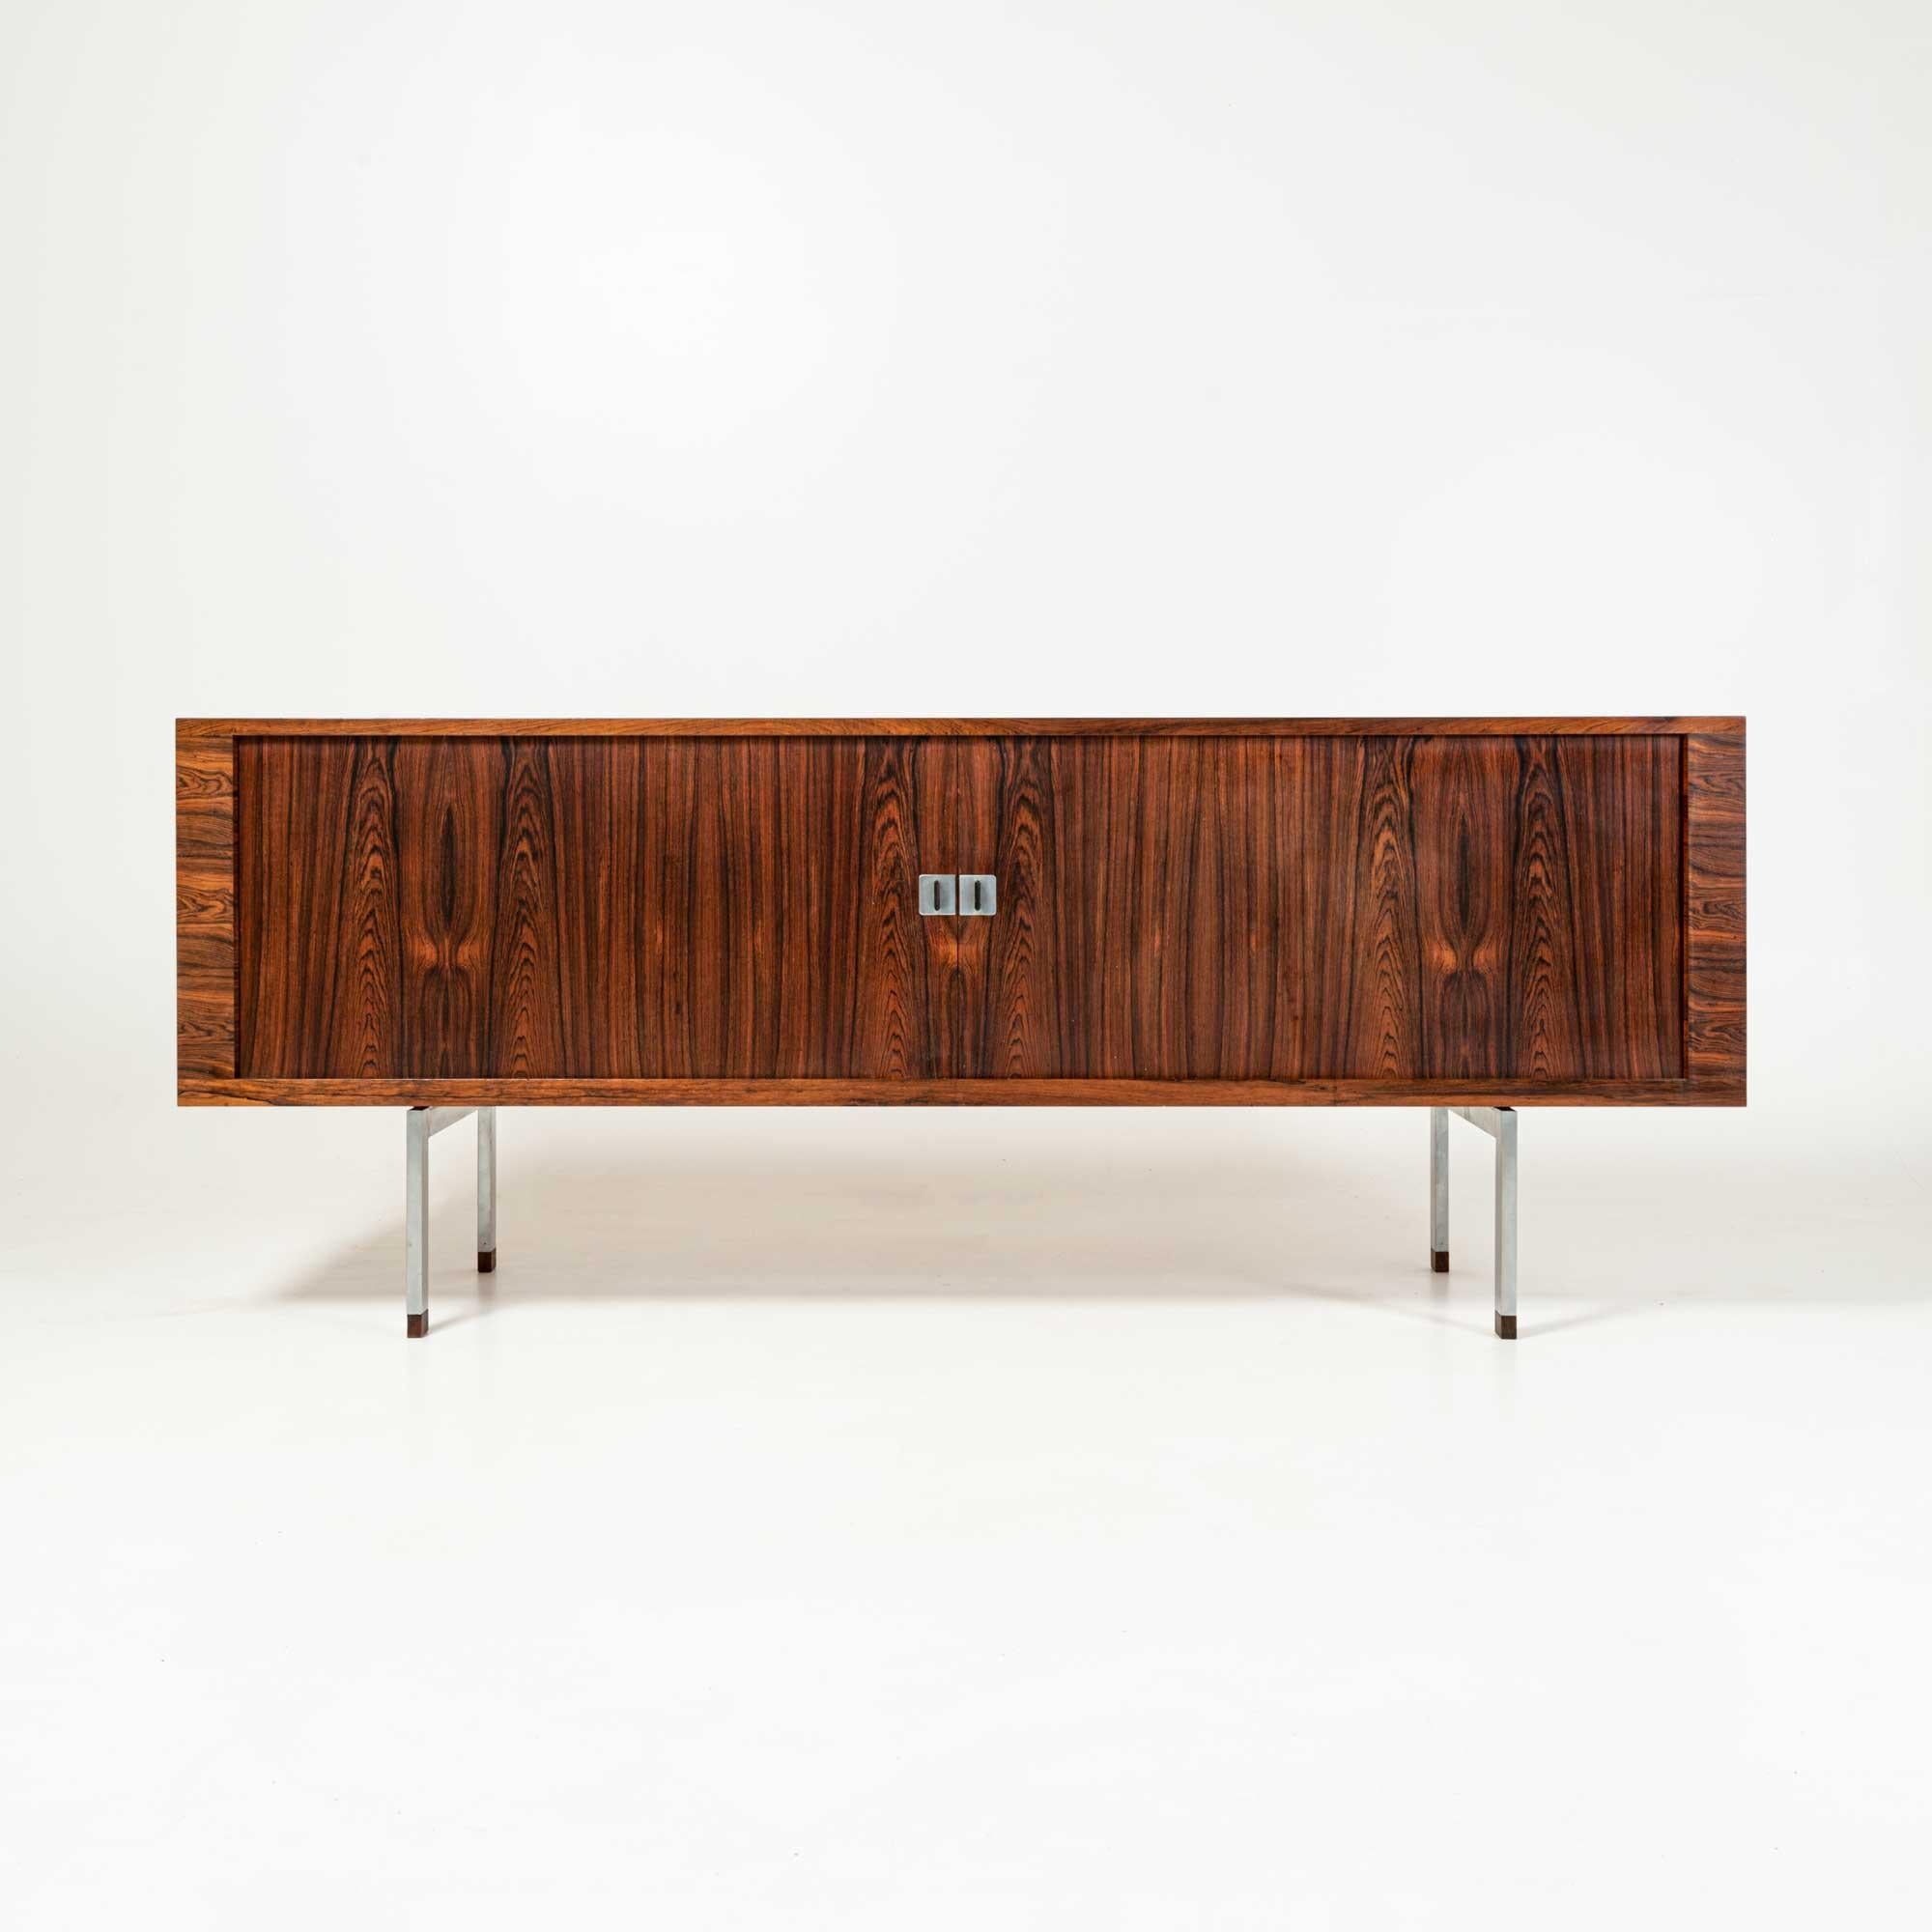 Produced in 1959, this Hans J. Wegner 'President' Tambour door credenza Model Ry-25 came in teak and rosewood. The 